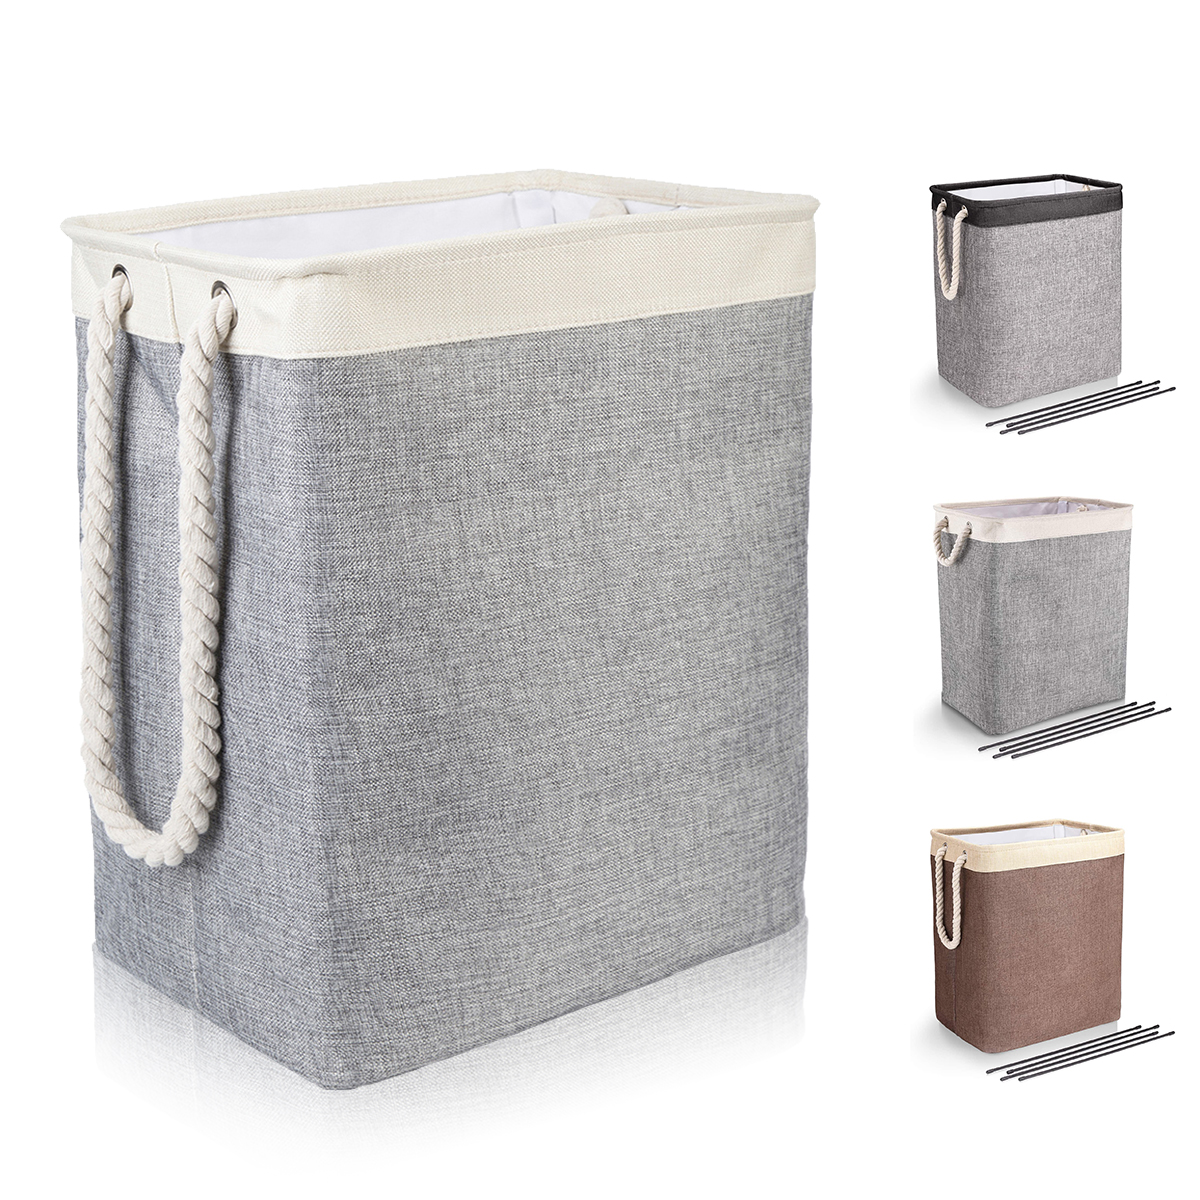 Laundry-Baskets-with-Handles-Collapsible-Linen-Hampers-Bedroom-Foldable-Storage-Laundry-Hamper-for-T-1788699-1